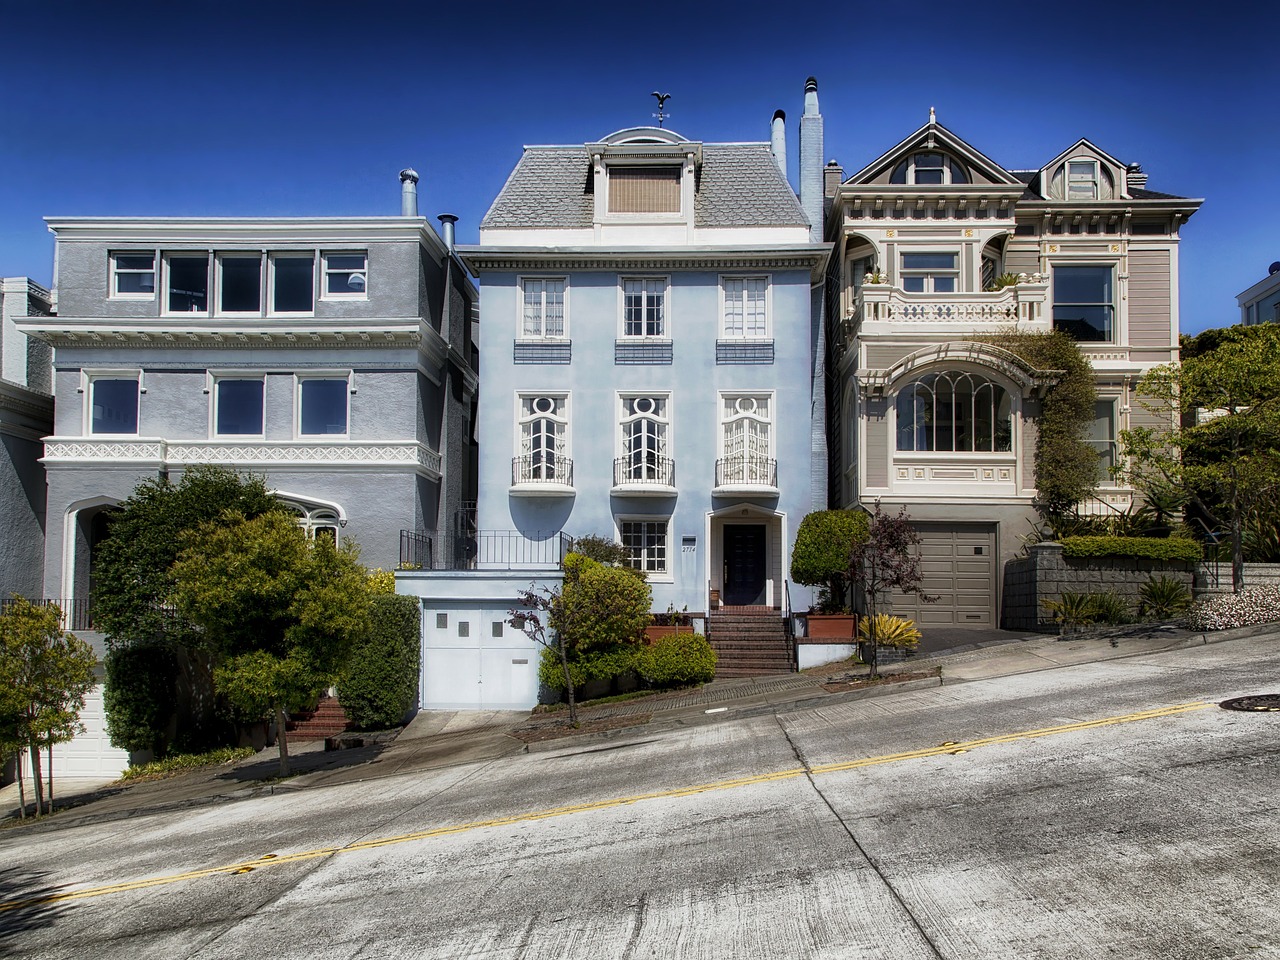 Homes-in-San-Francisco1